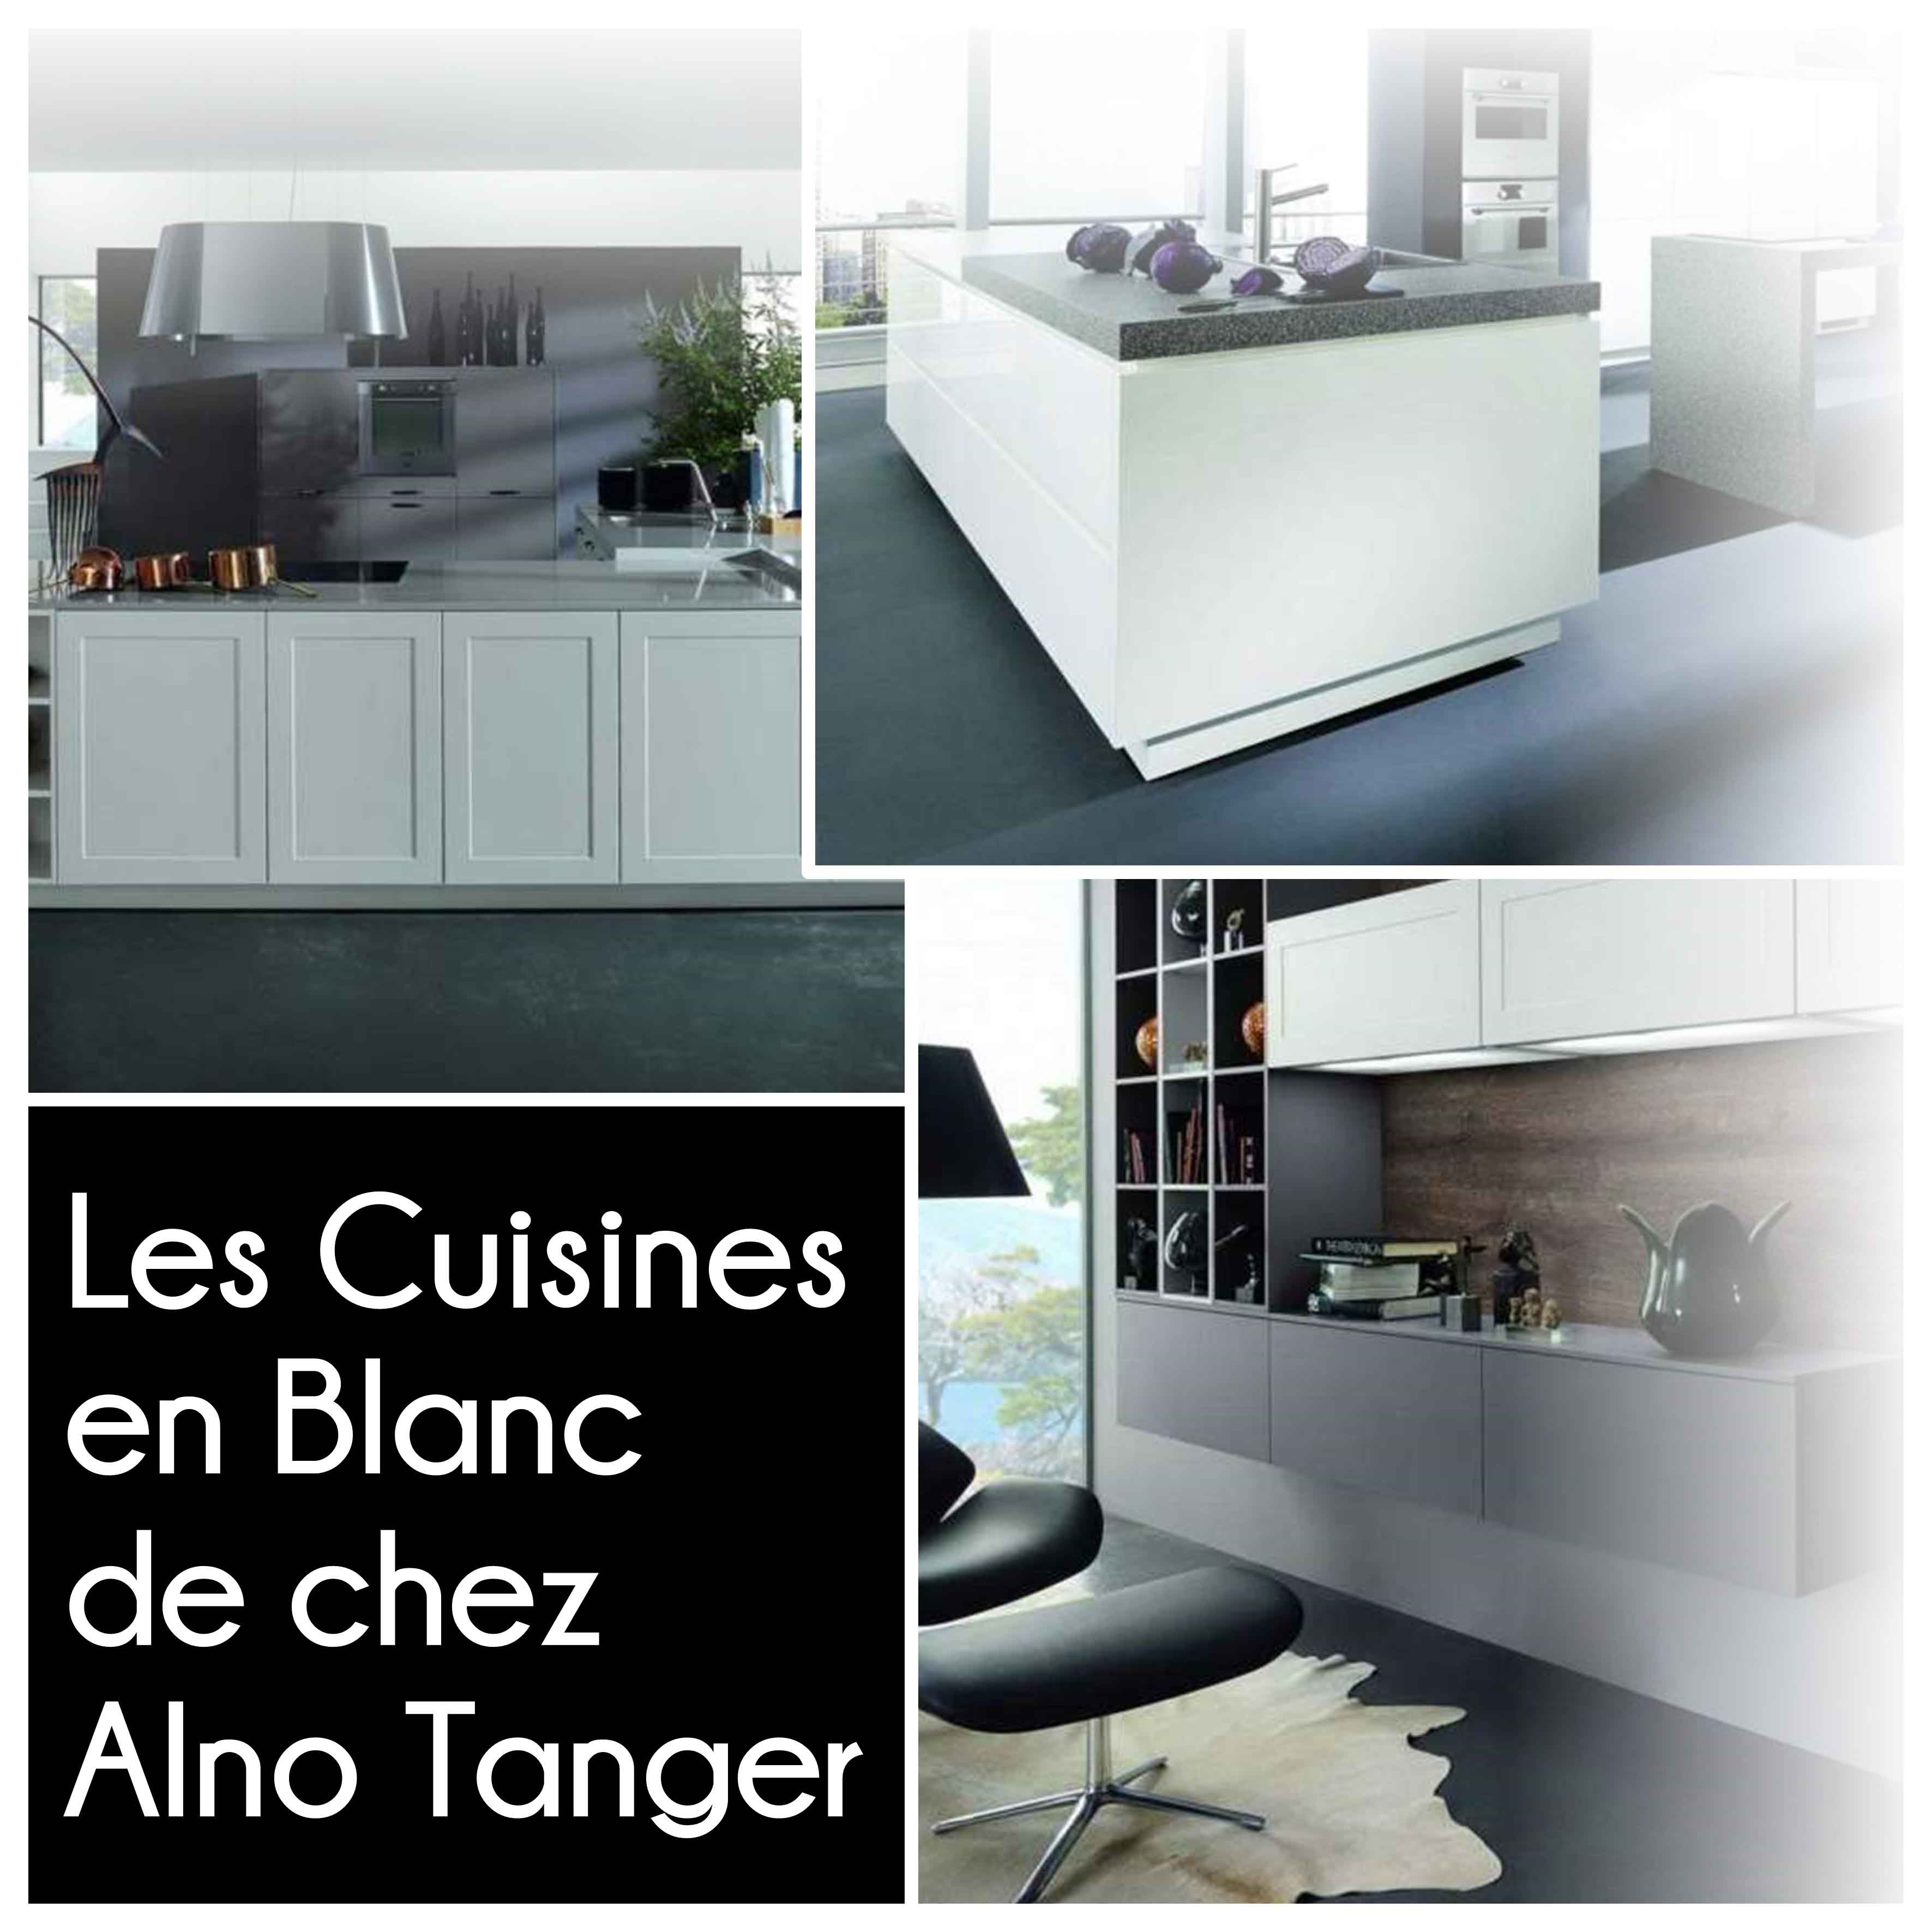 featured image Cuisines Alno Tanger Interiors mabani.info mabani.ma